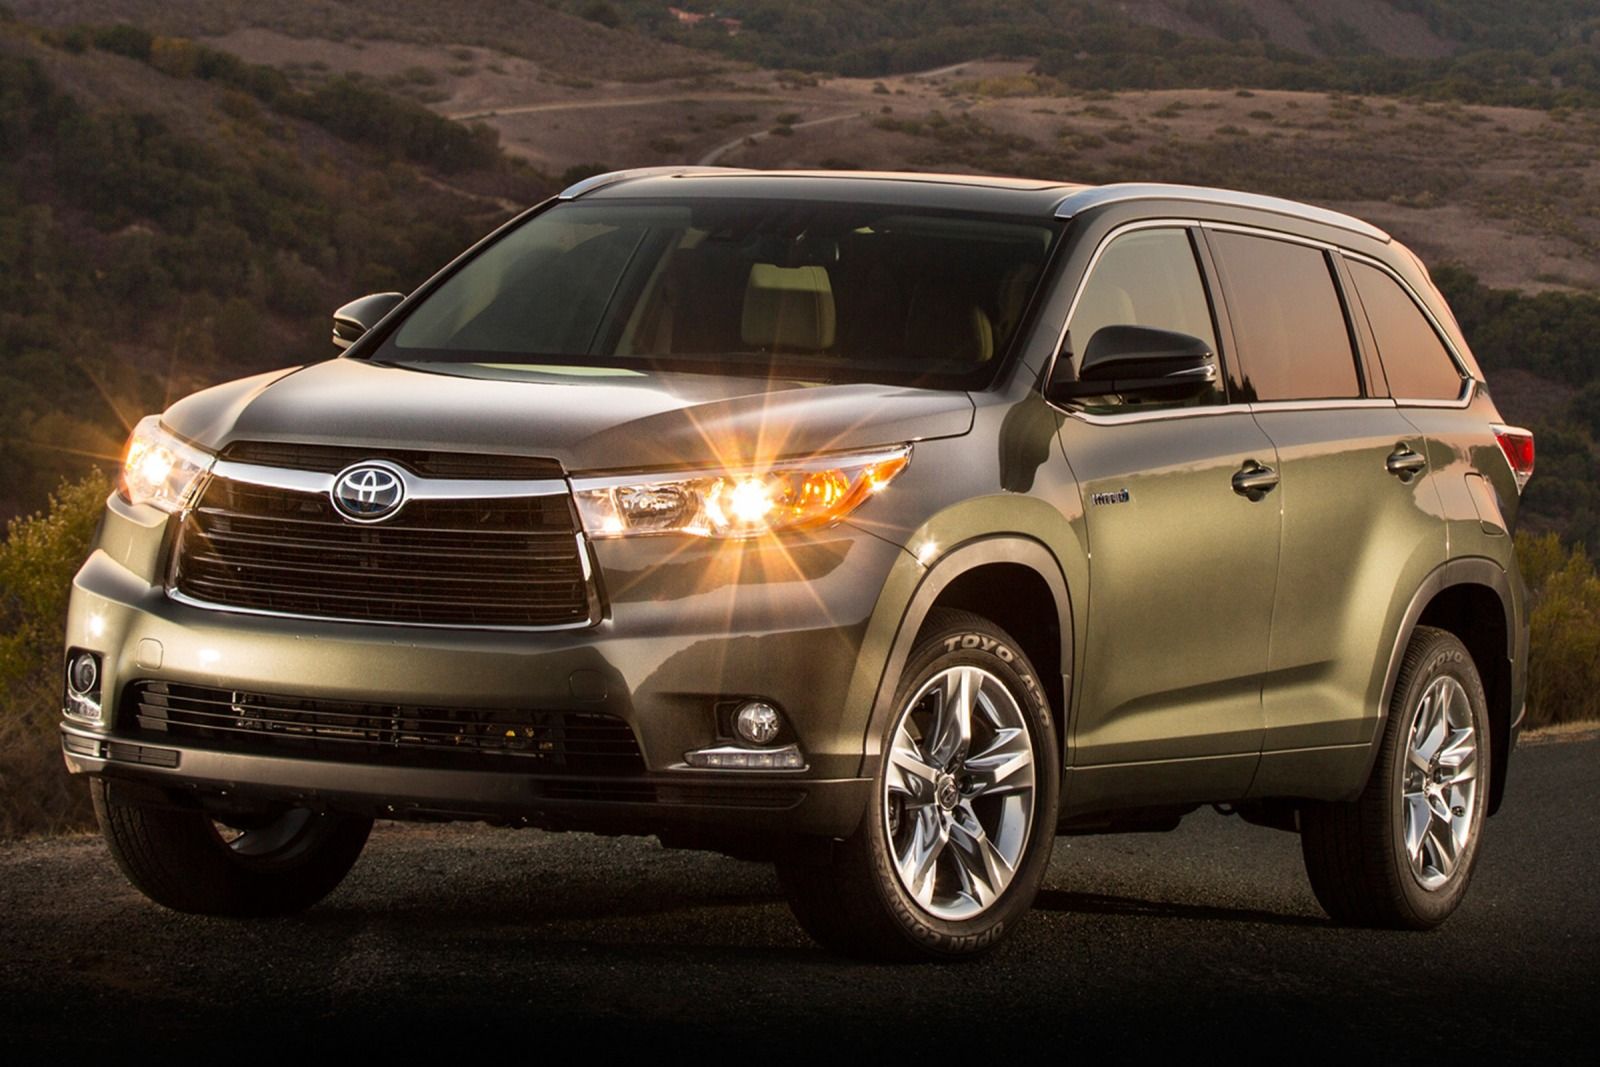 Best Year For Used Toyota Highlander